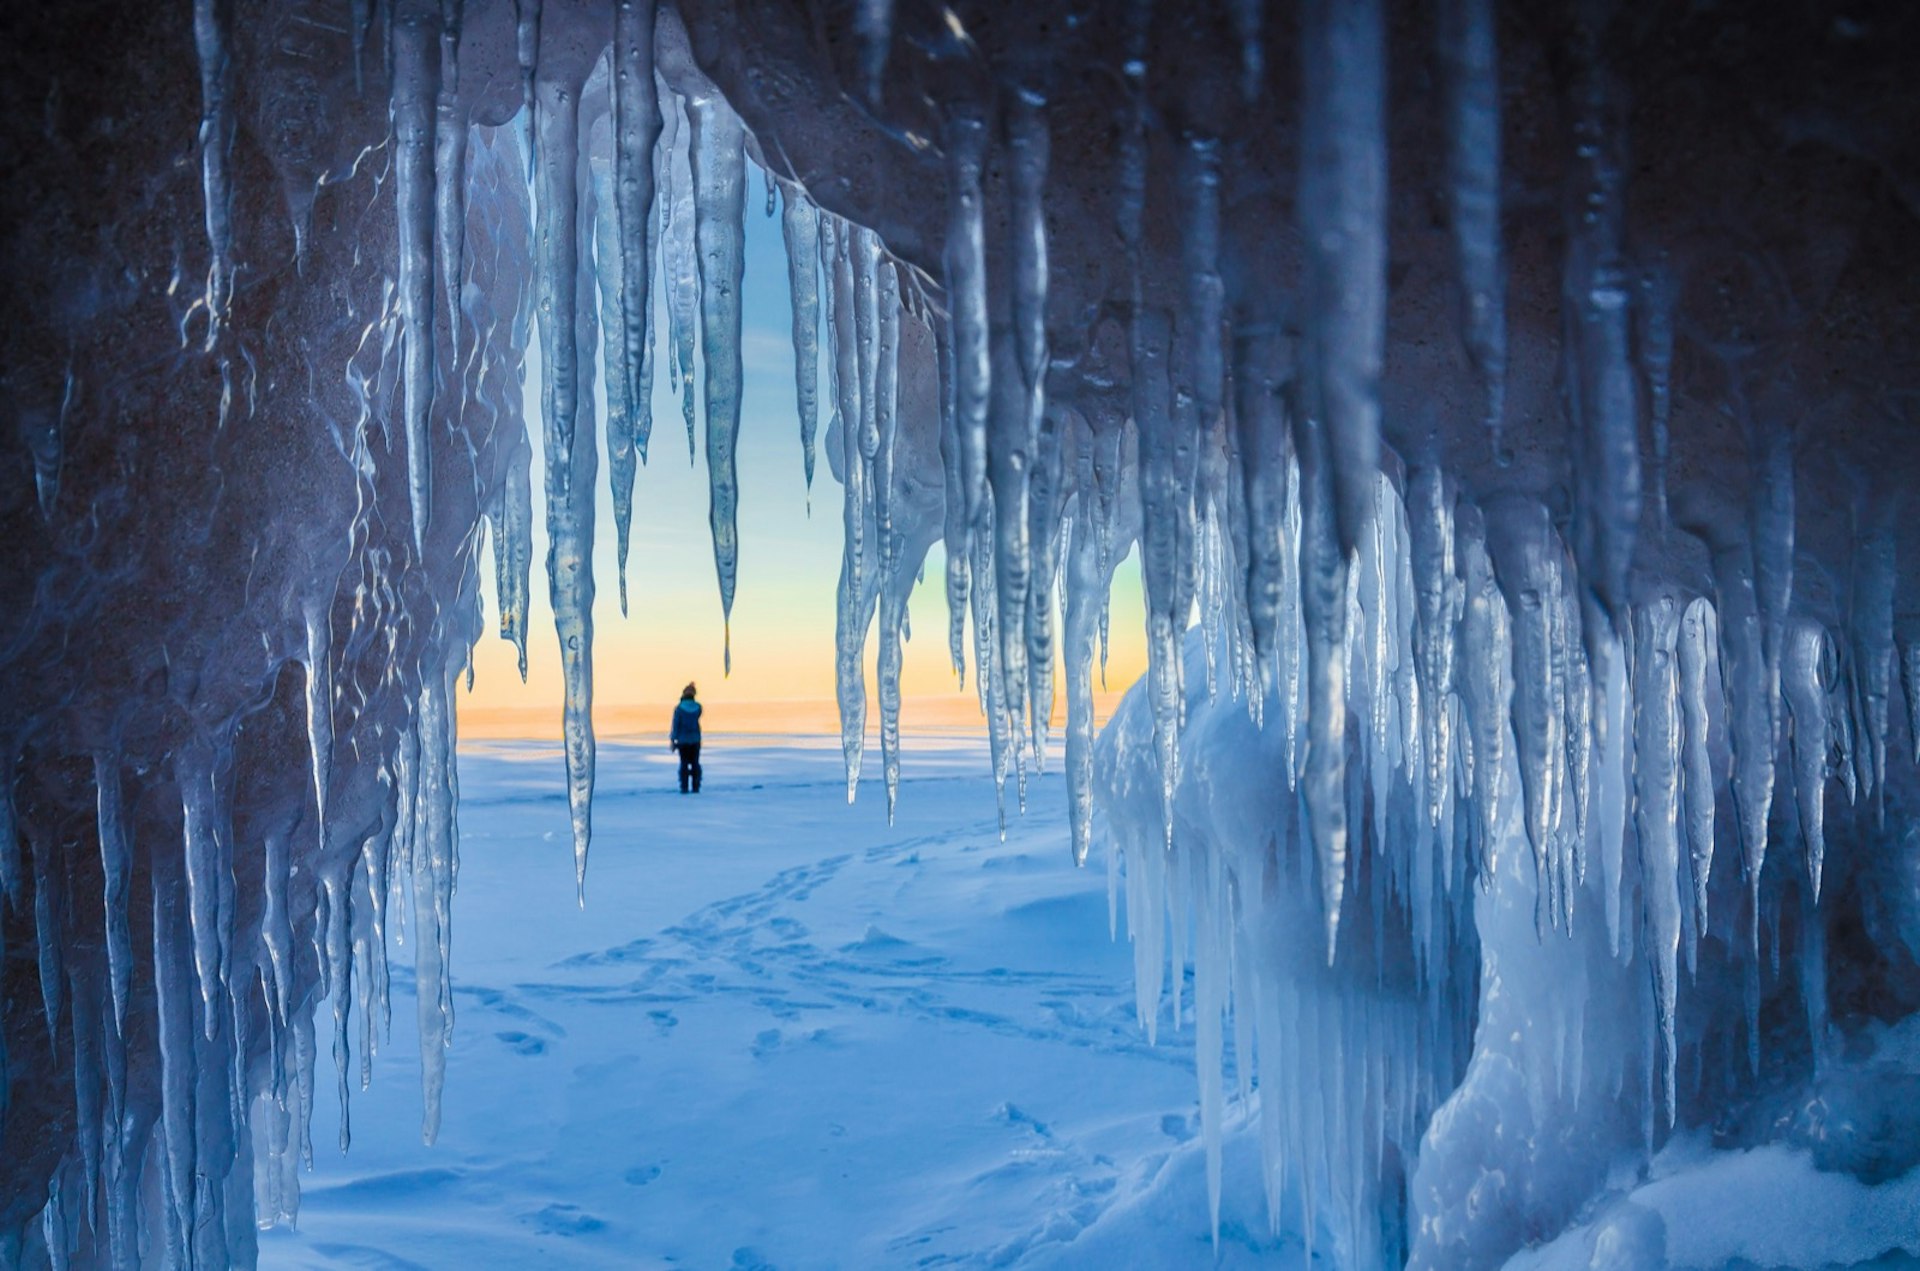 Icicles in an ice cave Winter adventure comes in all shapes and sizes in Michigan's Upper Peninsula